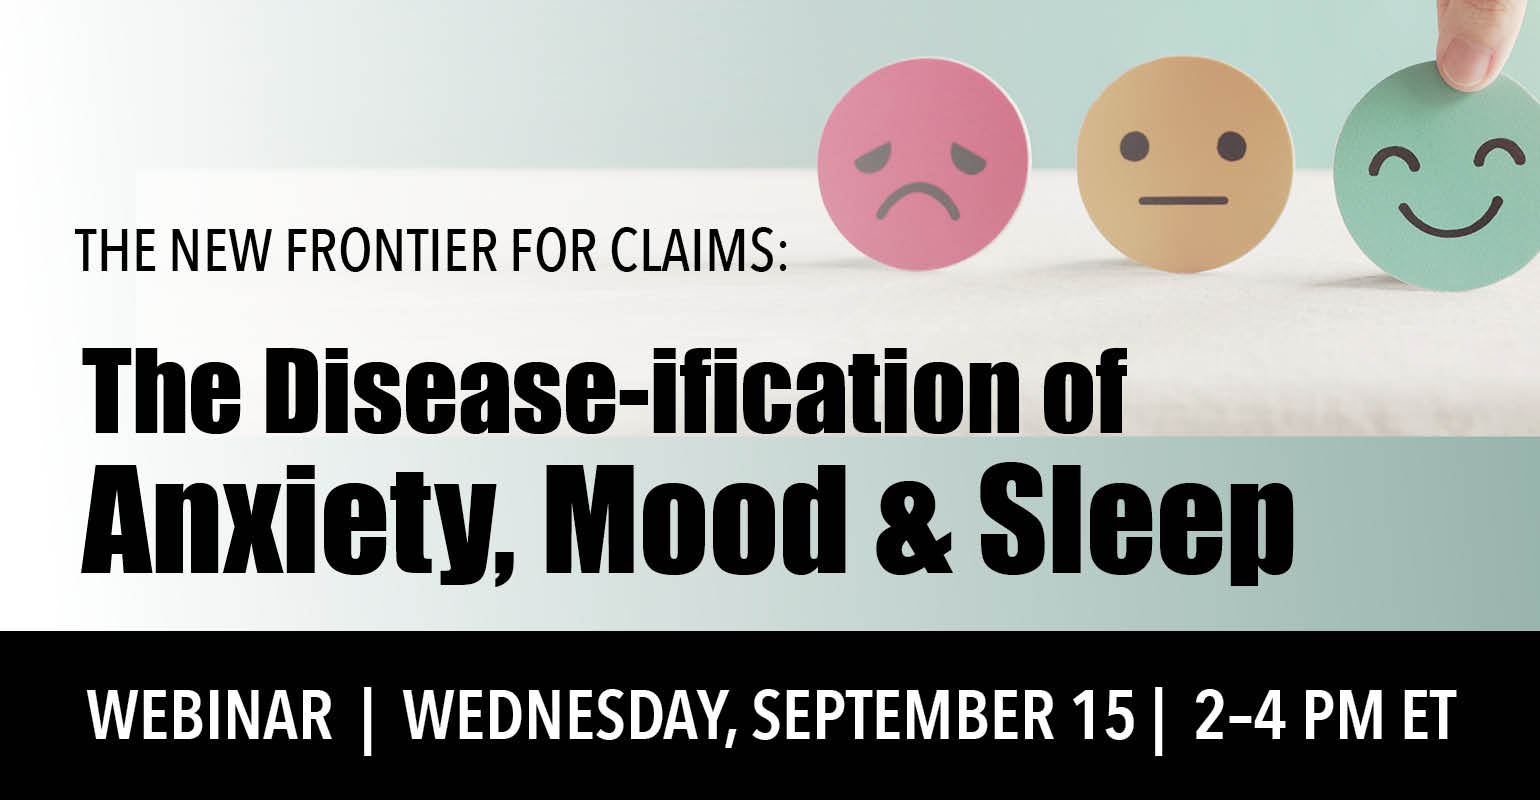 The New Frontier for Claims: The Disease-ification of Anxiety, Mood & Sleep